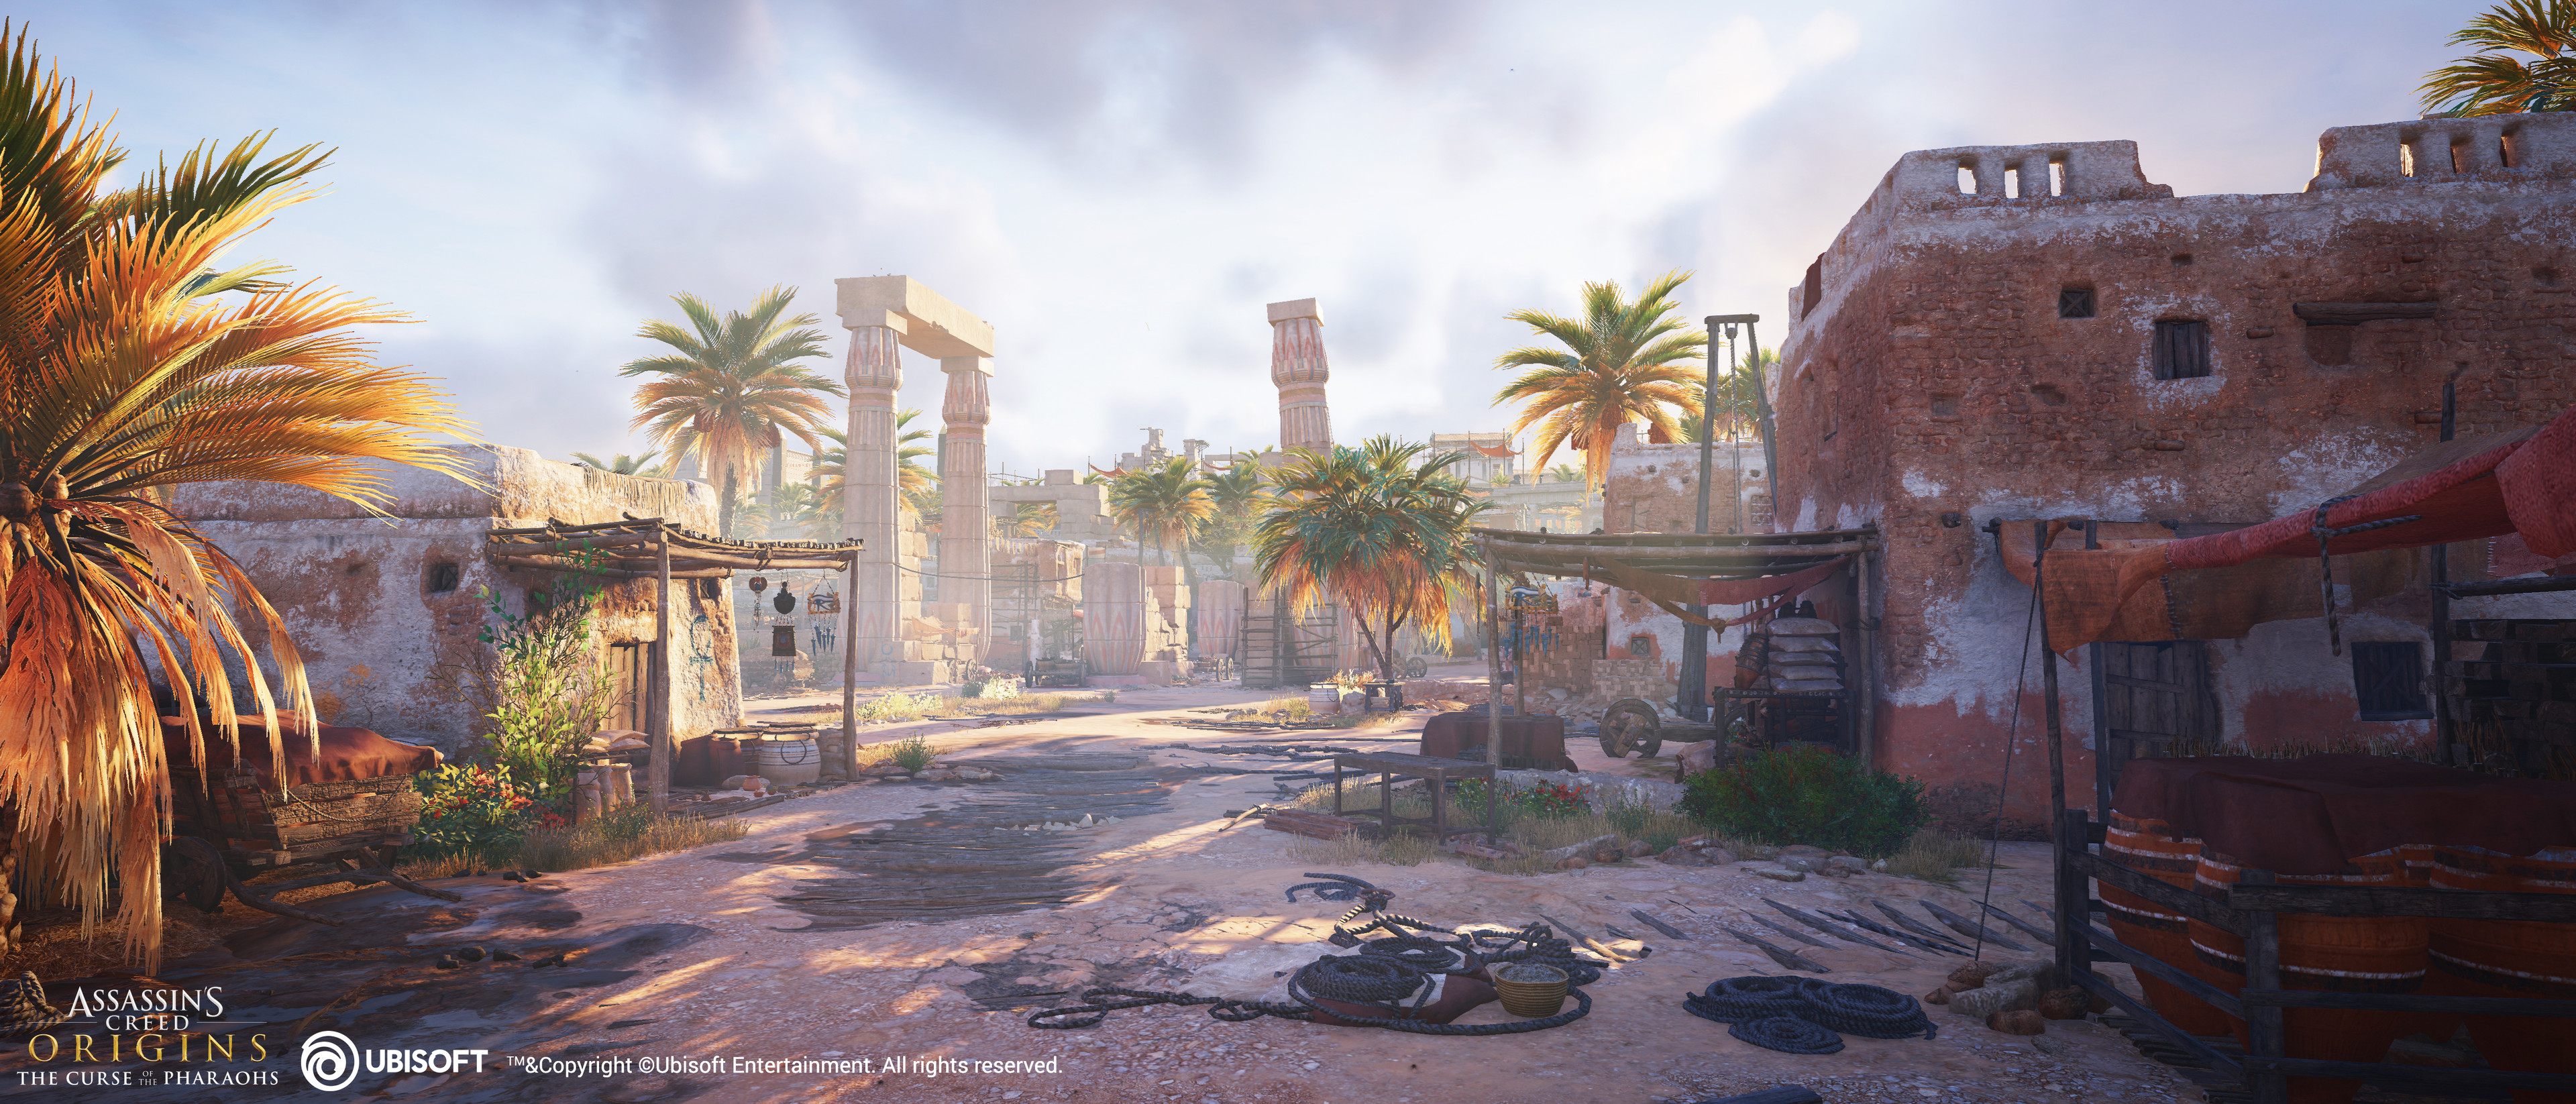 ArtStation - Assassin's Creed Origins - The curse of the pharaohs DLC -  Thebes city overall silh…